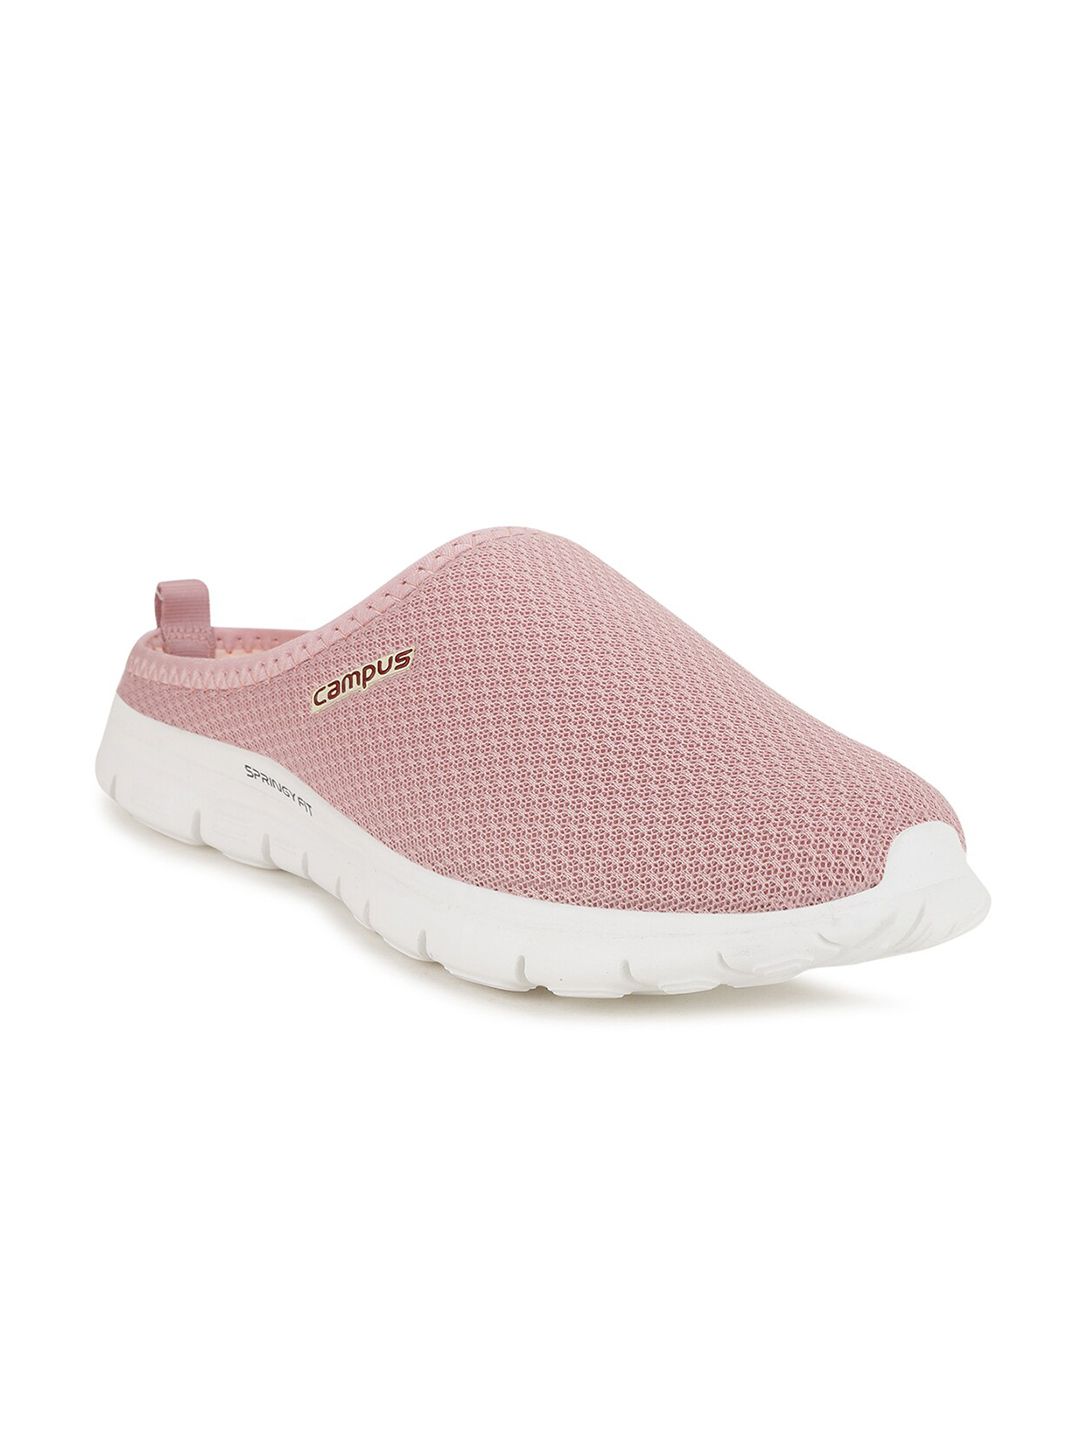 Campus Women Peach-Coloured Mesh Walking Shoes Price in India